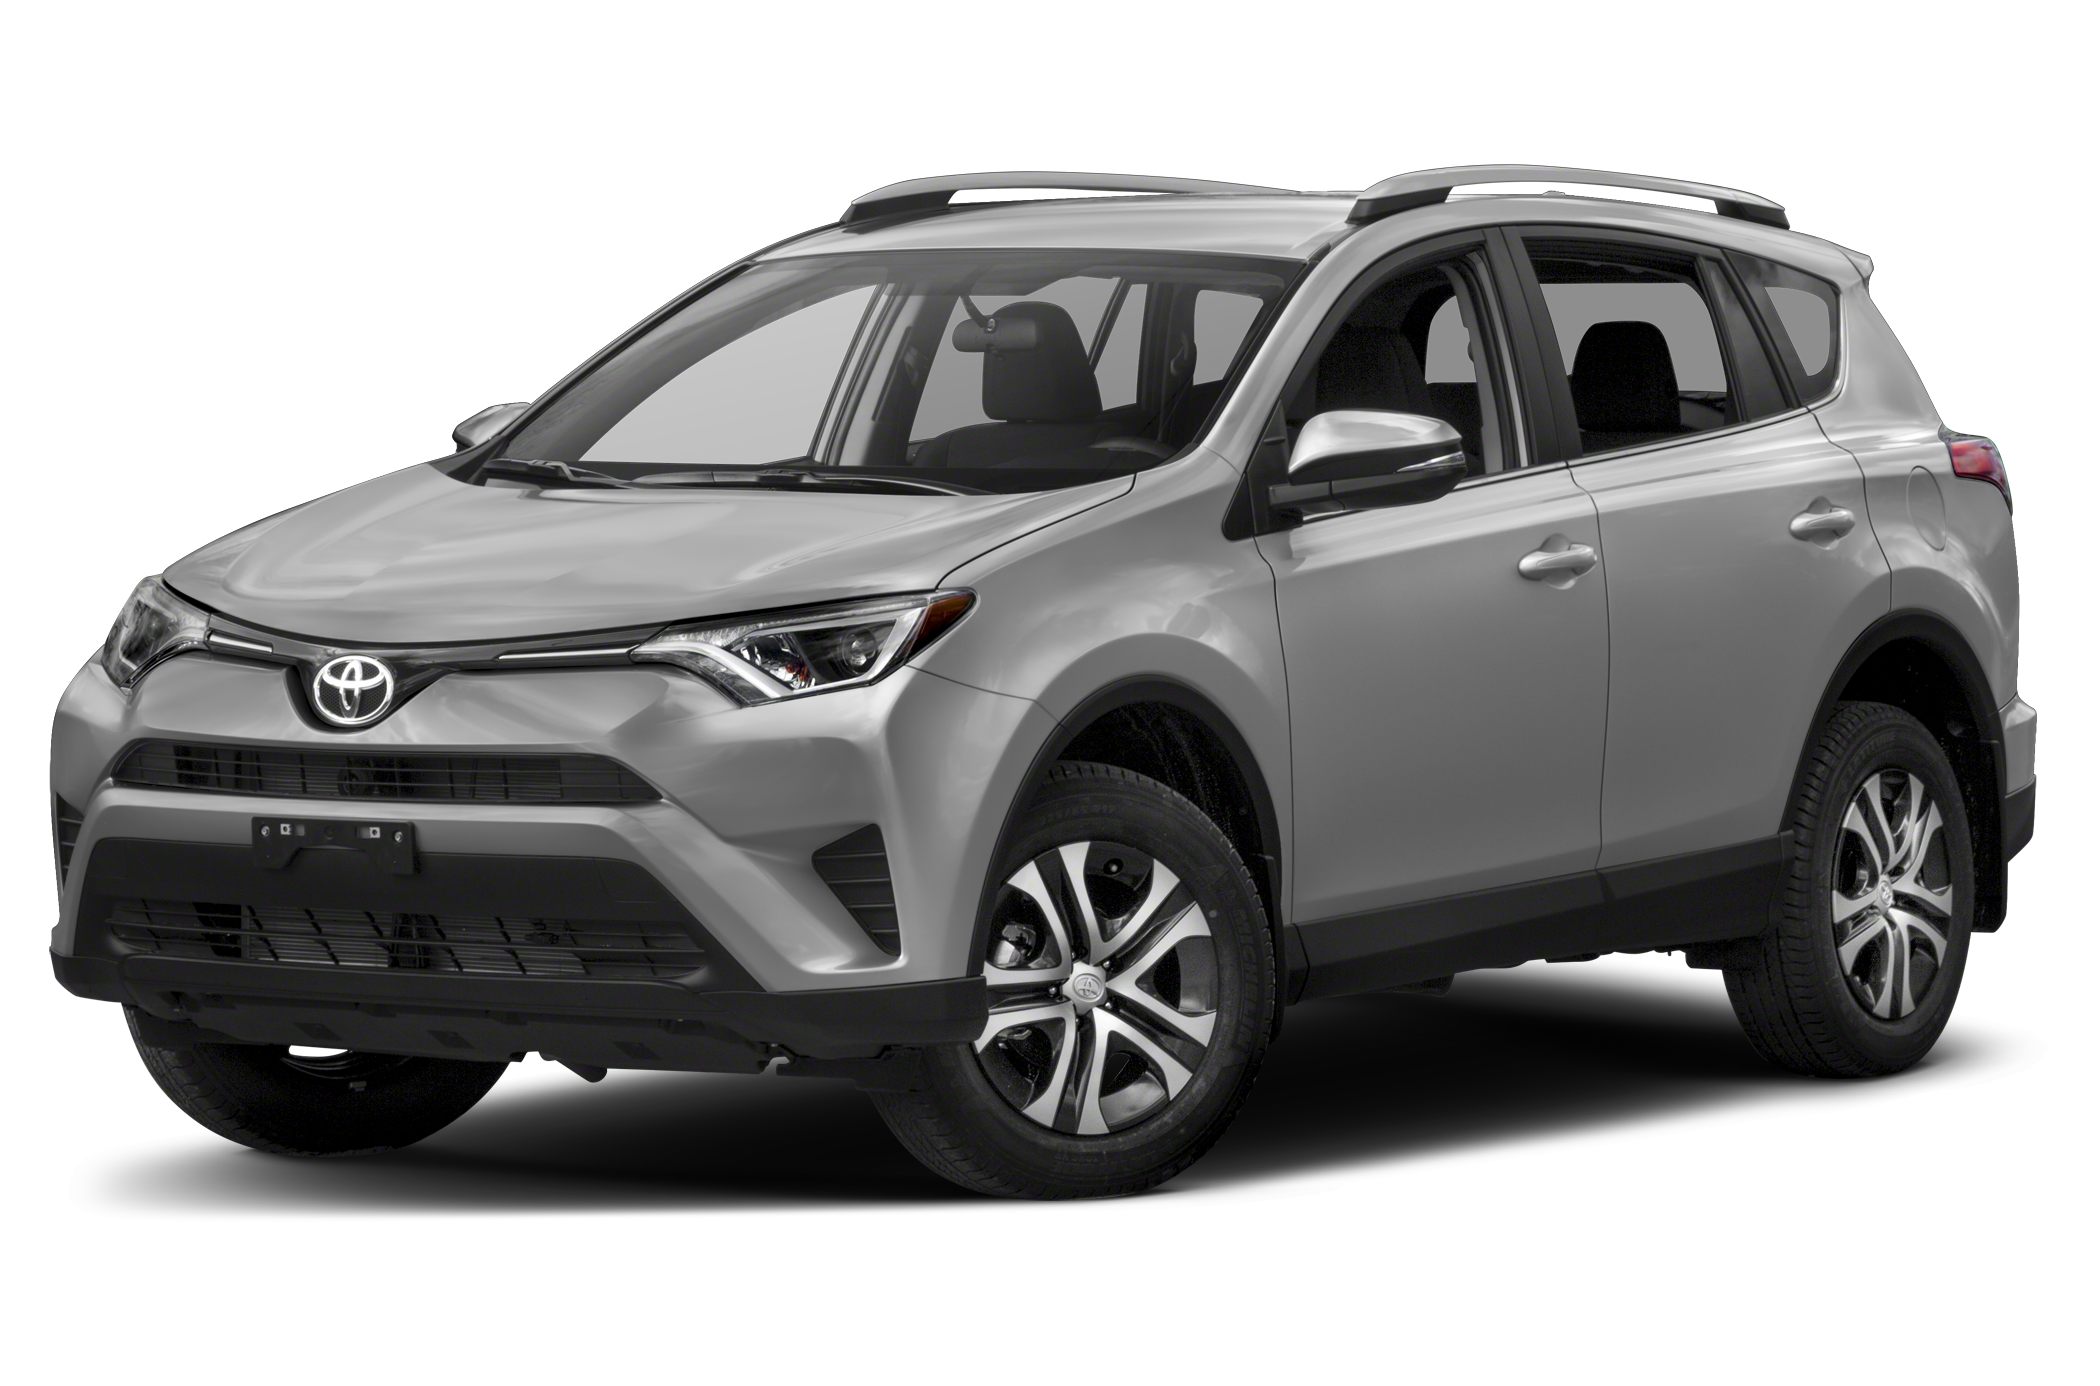 2017 Toyota Rav4 oem parts and accessories on sale